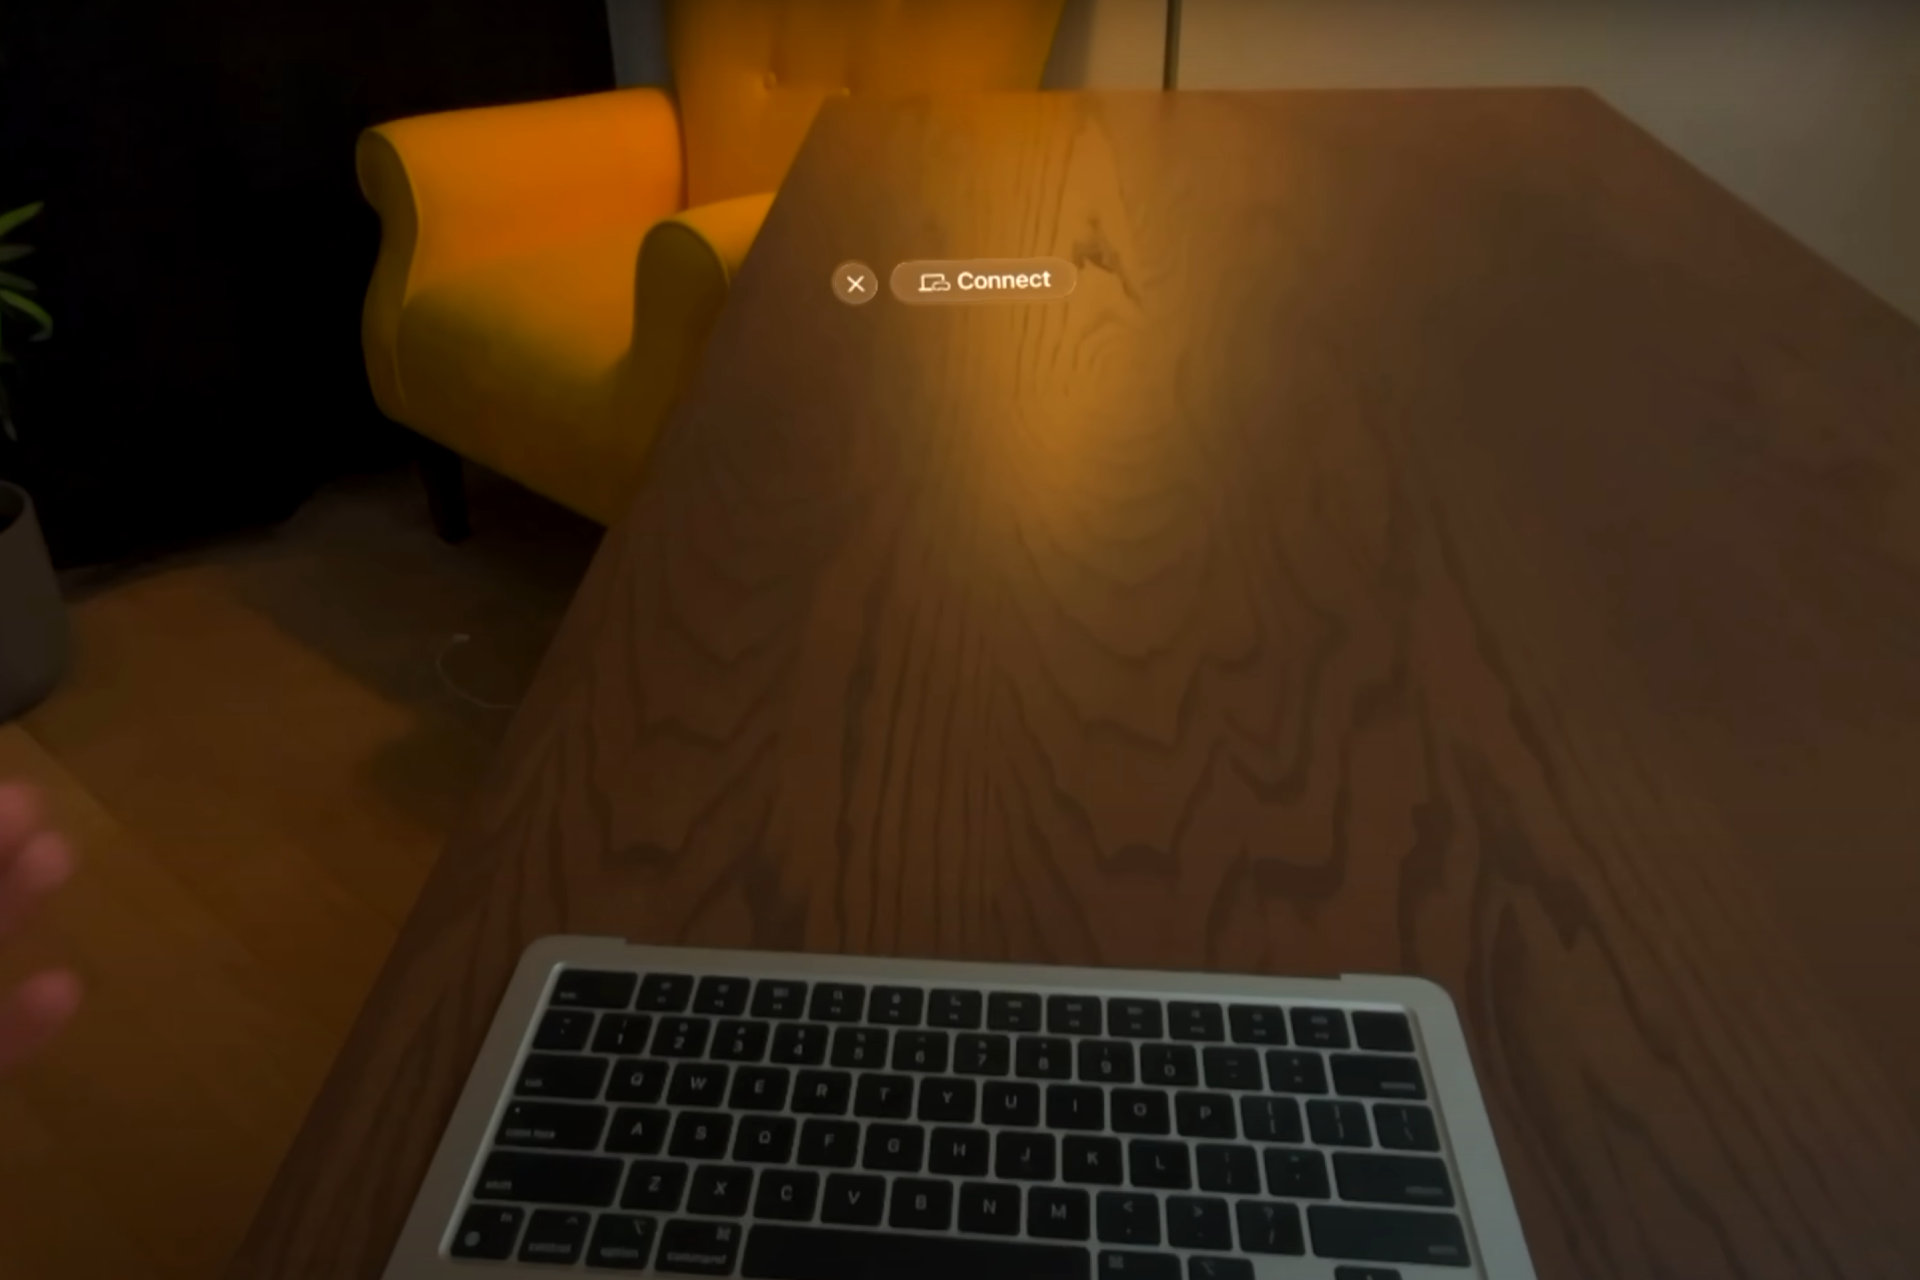 The Vision Pro sees the MacBook and offers to connect, even though it lacks a screen.